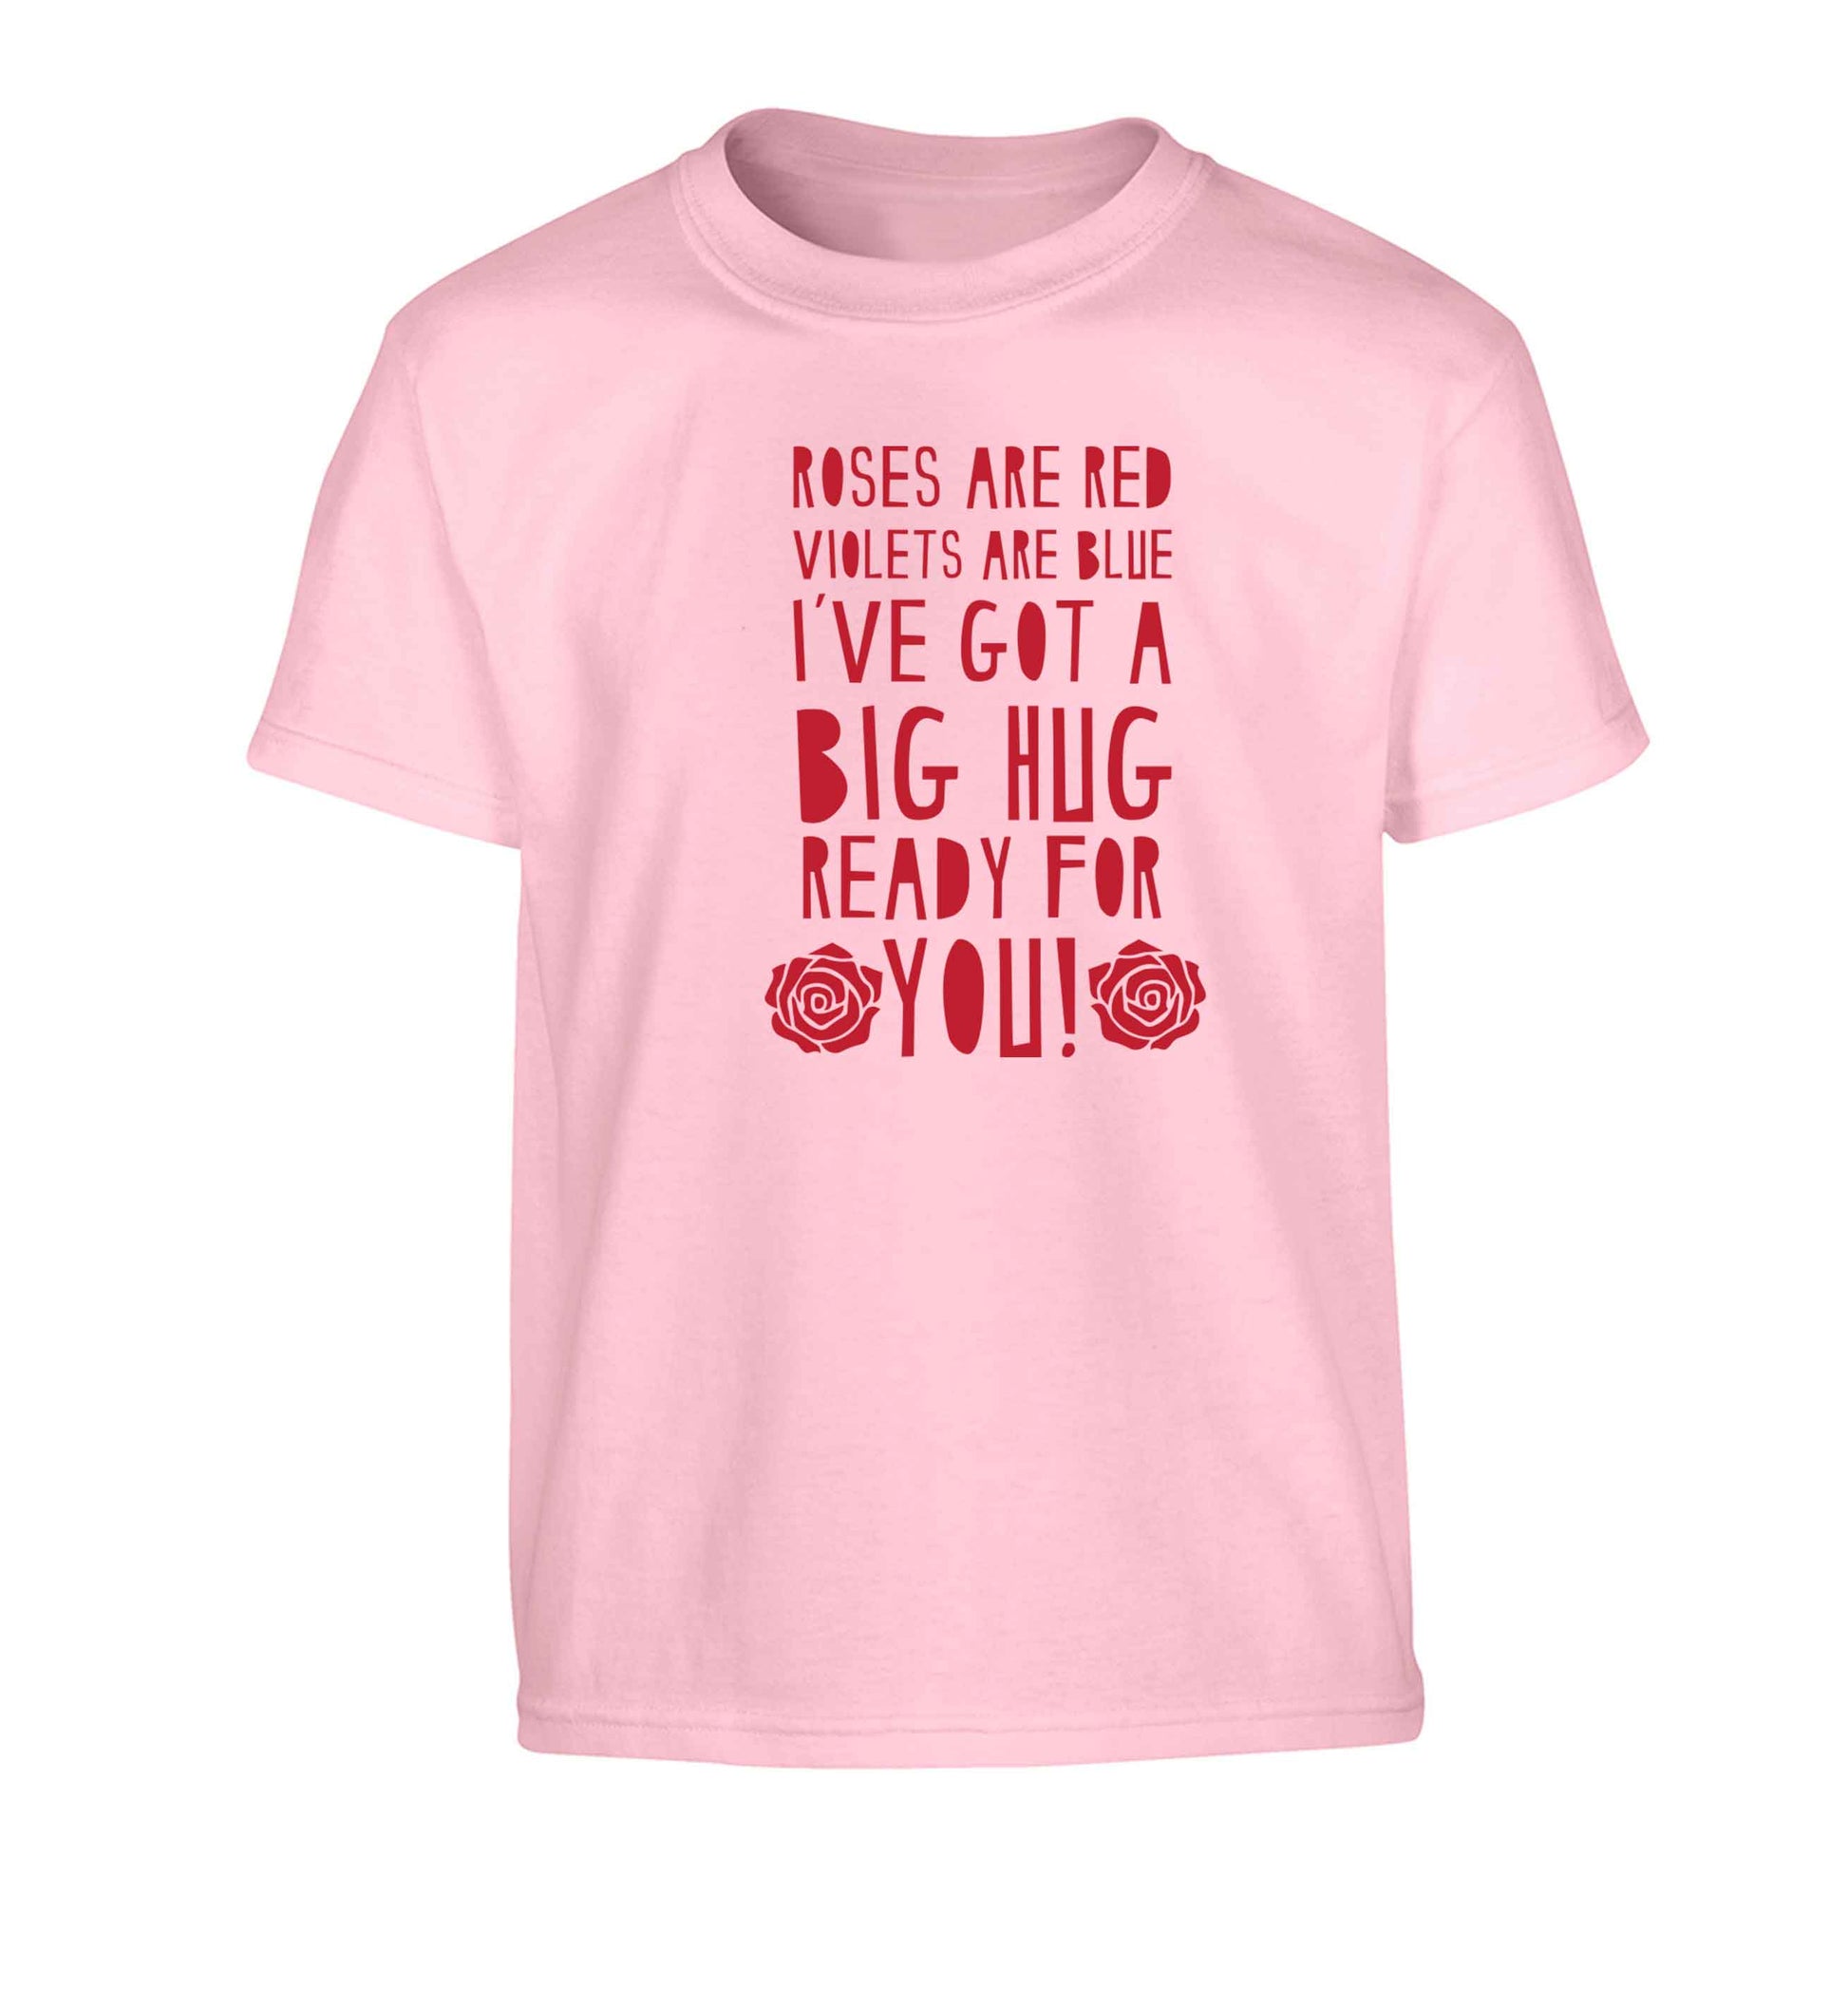 Roses are red violets are blue I've got a big hug coming for you Children's light pink Tshirt 12-13 Years